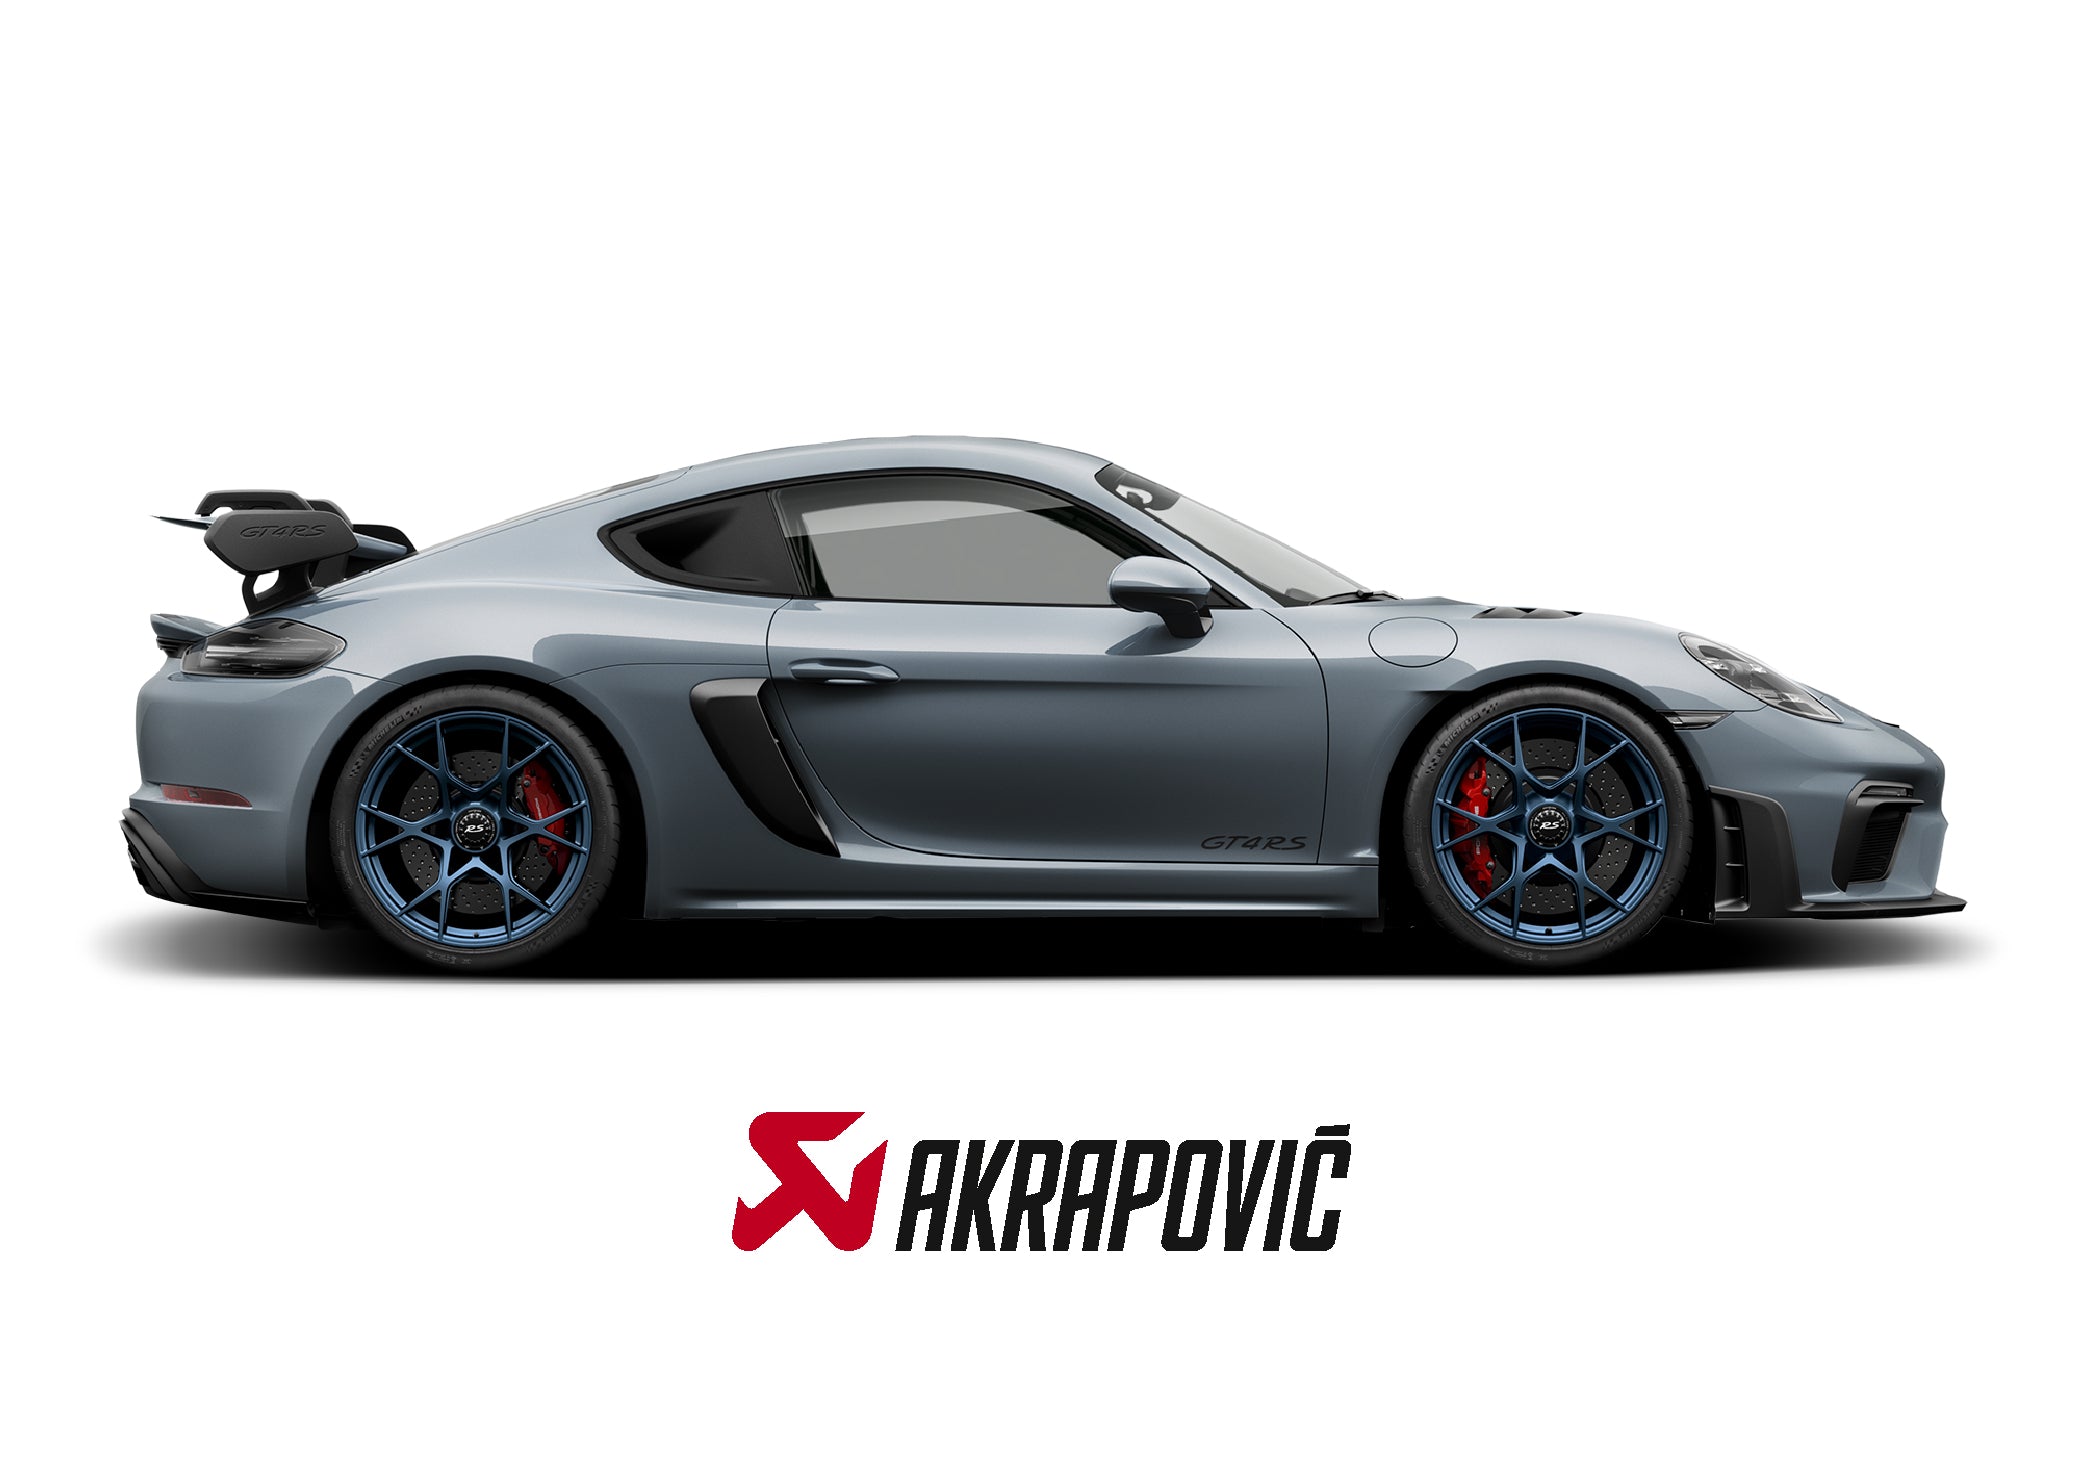 New AKRAPOVIC products for PORSCHE Cayman GT4 RS